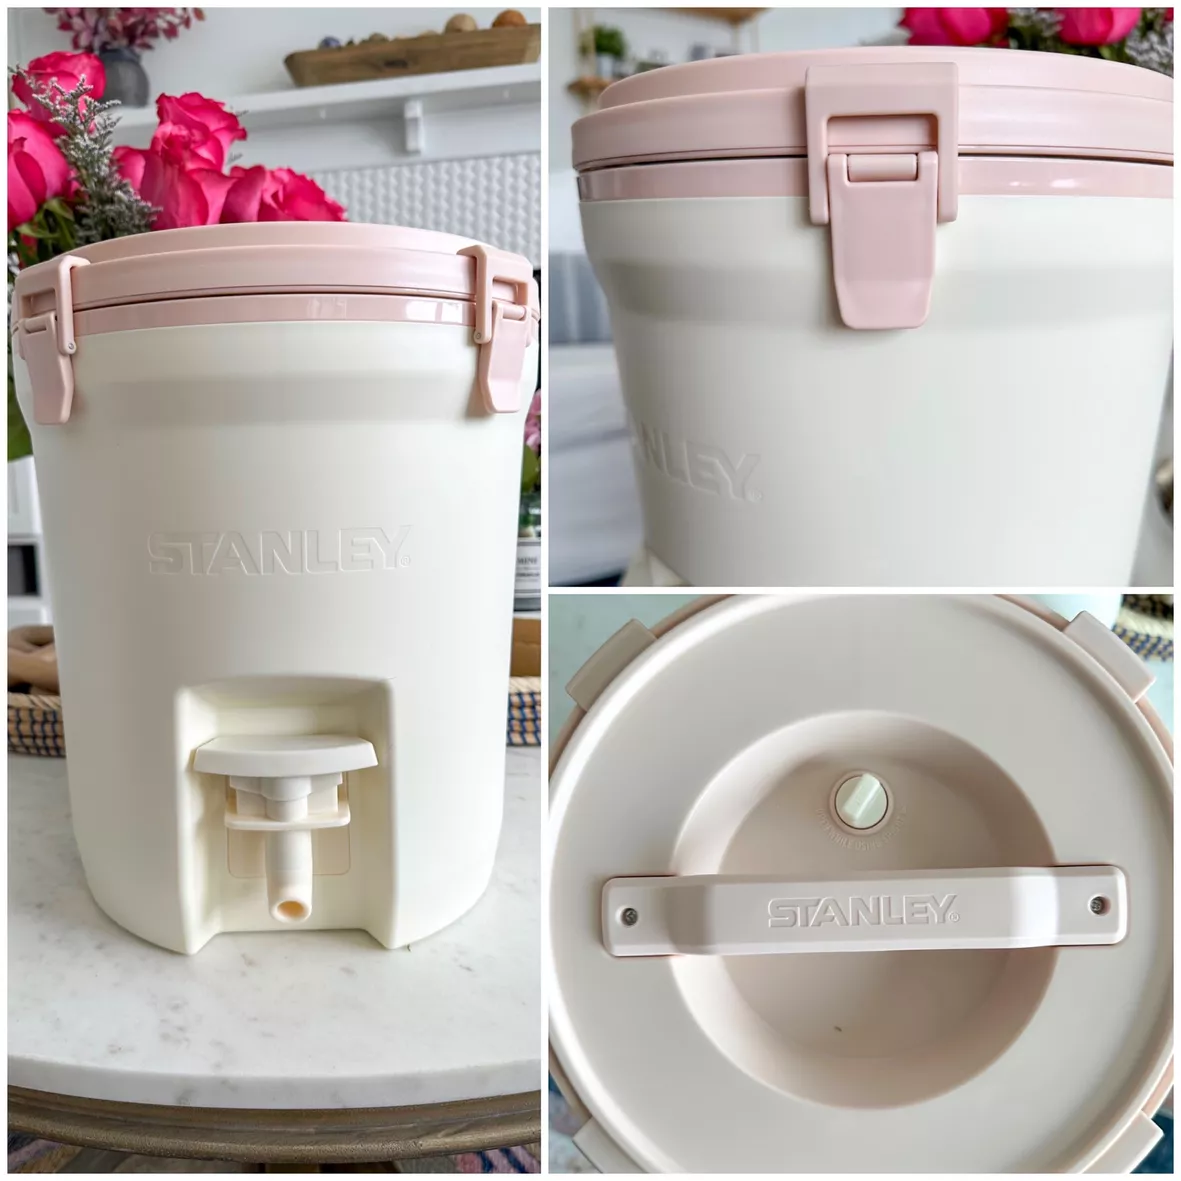 QUICK REVIEW: Stanley Adventure Fast Flow 2G Water Jug 